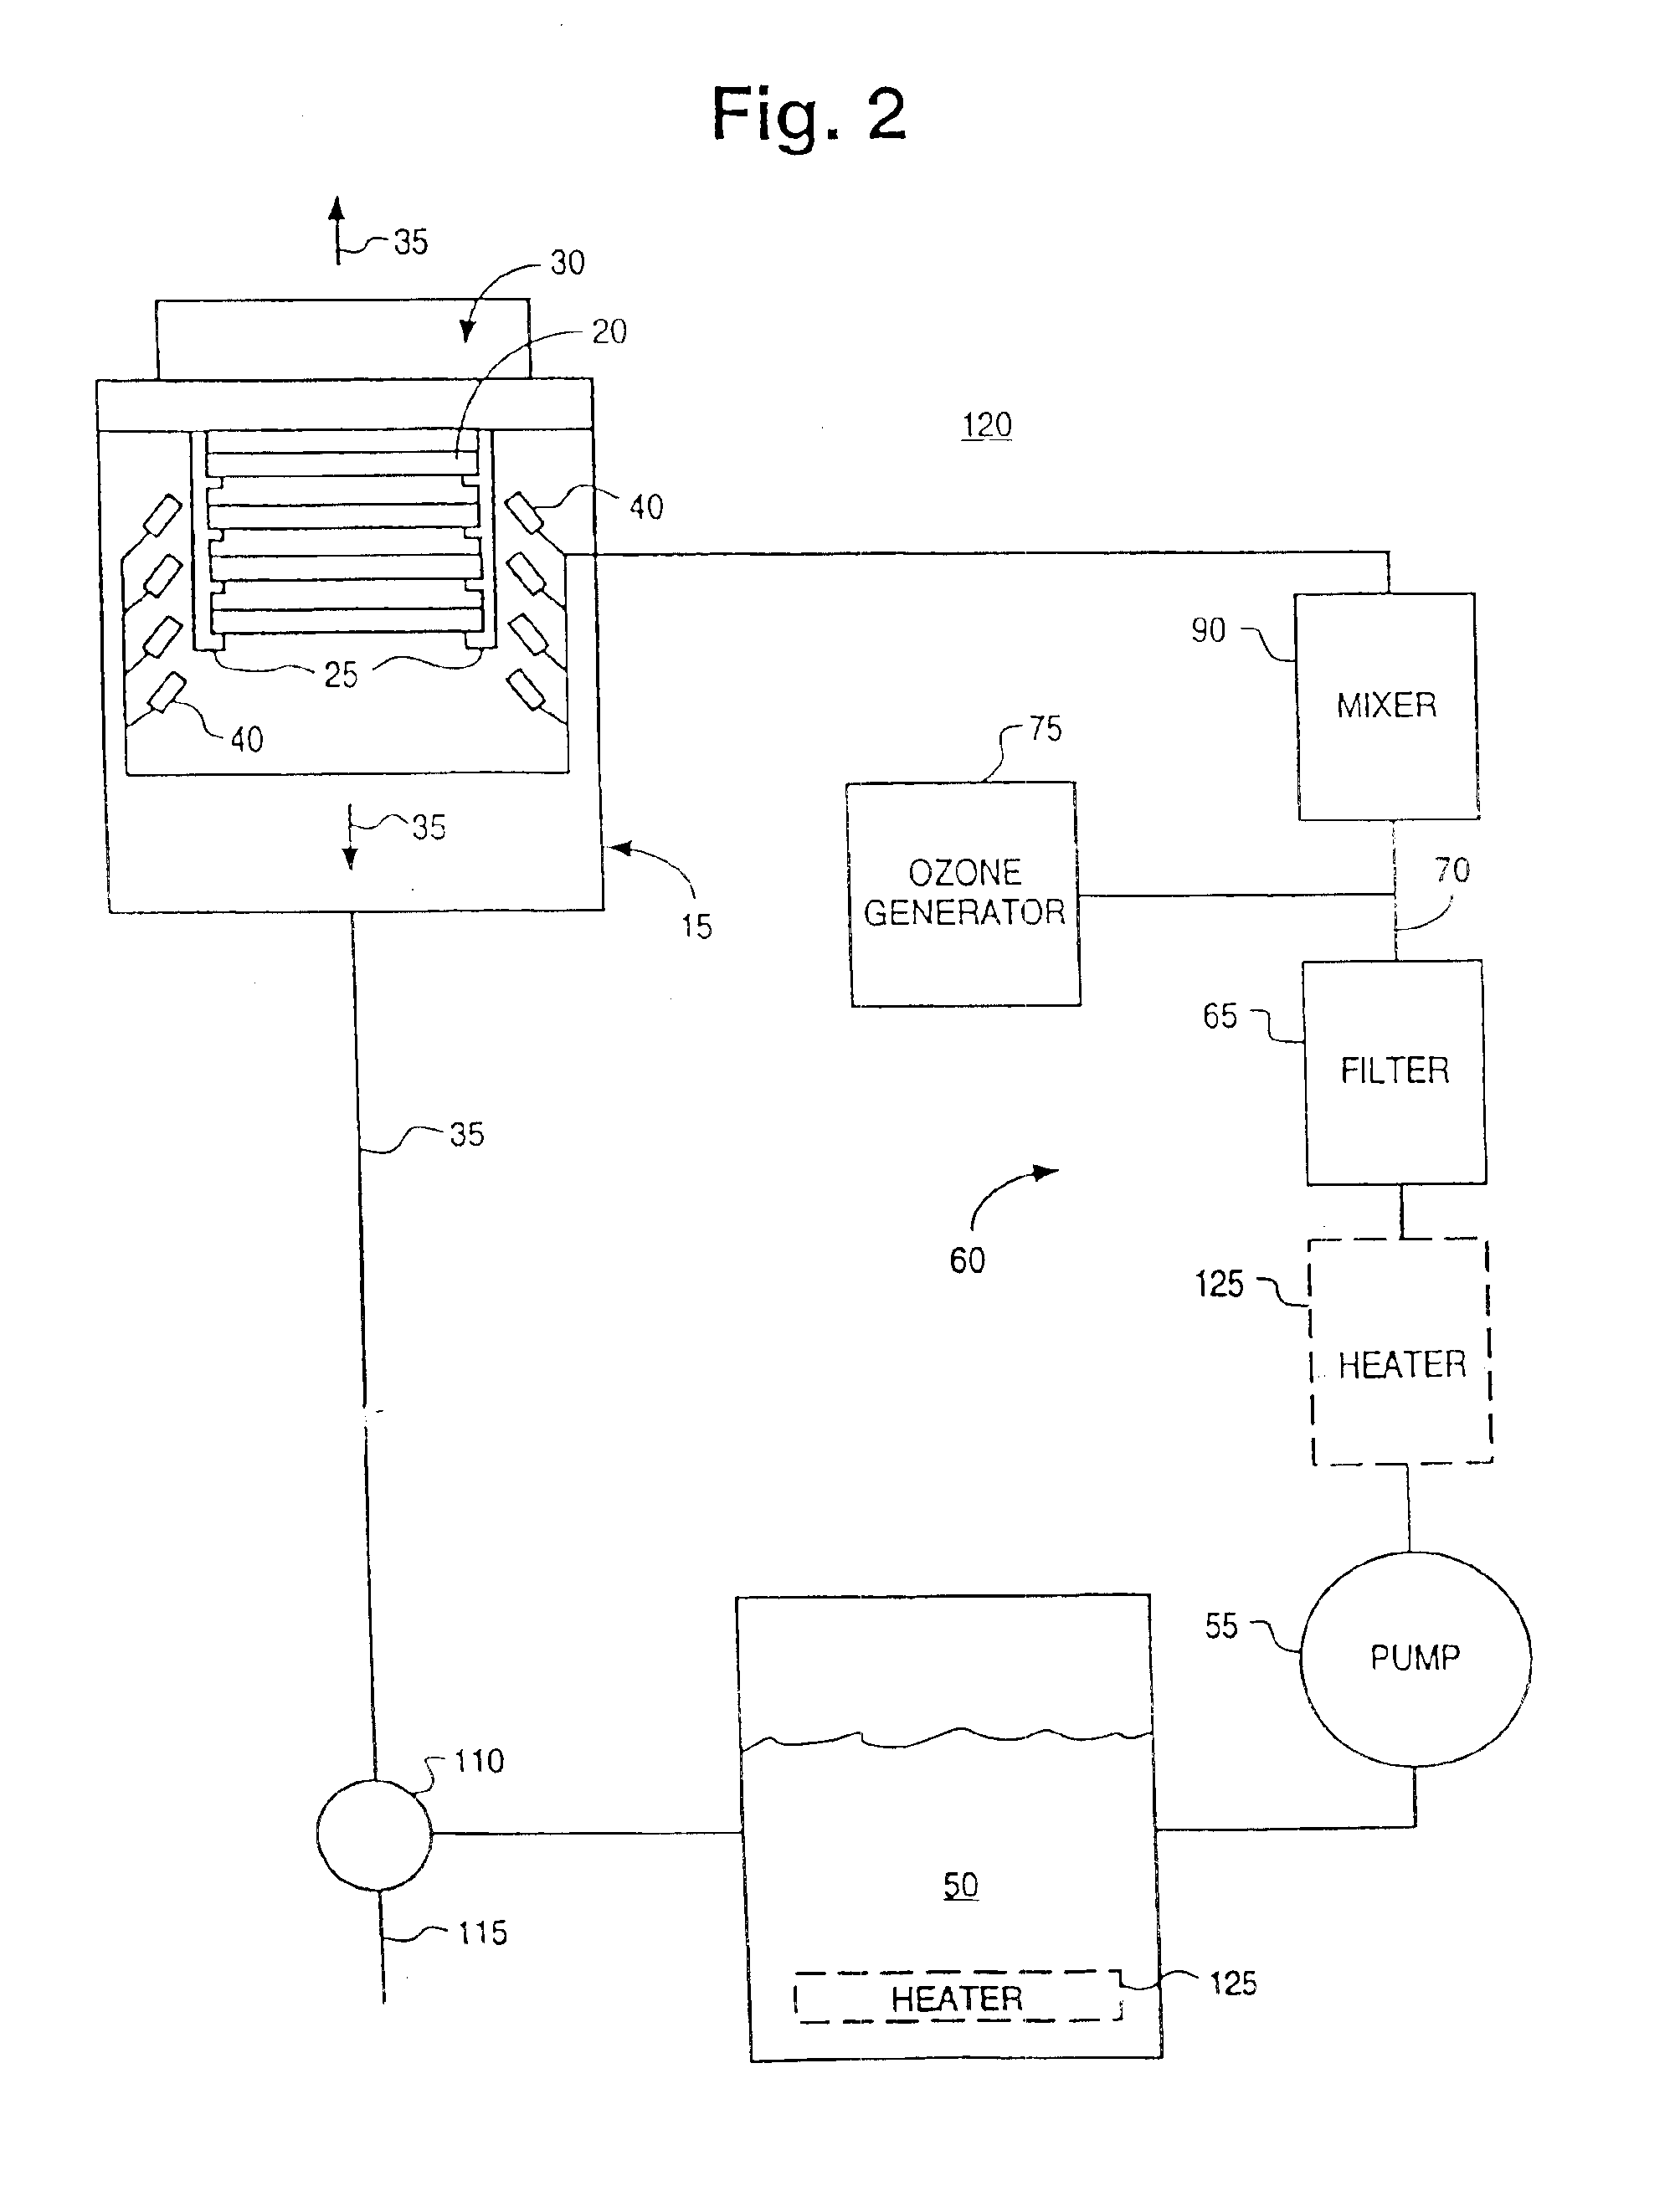 Process and apparatus for treating a workpiece such as a semiconductor wafer